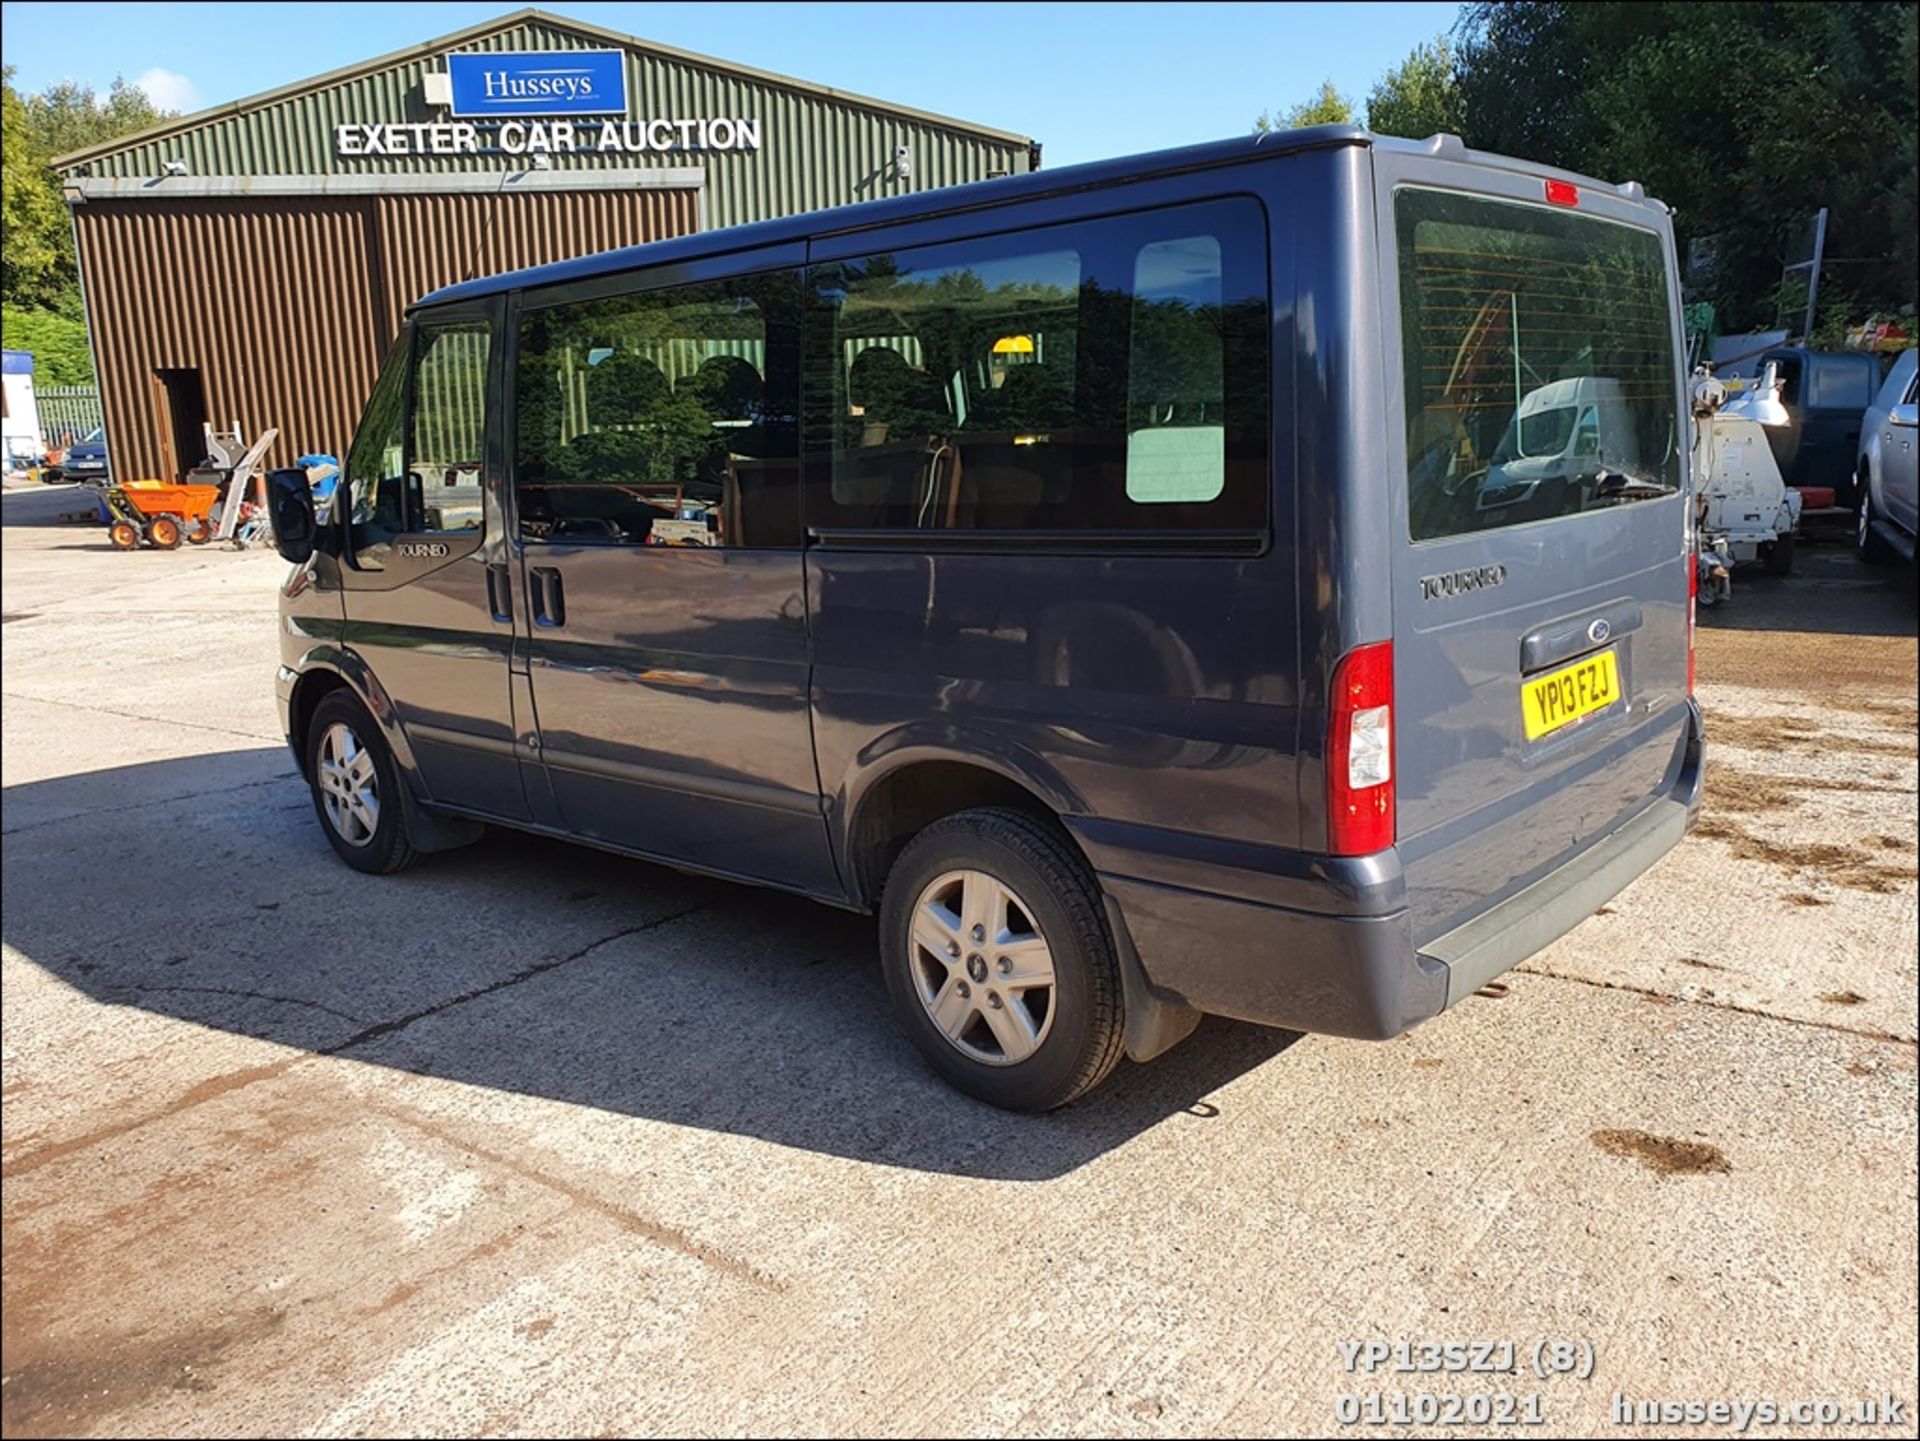 13/13 FORD TRANSIT 125 T280 FWD - 2198cc 5dr MPV (Grey) - Image 17 of 18